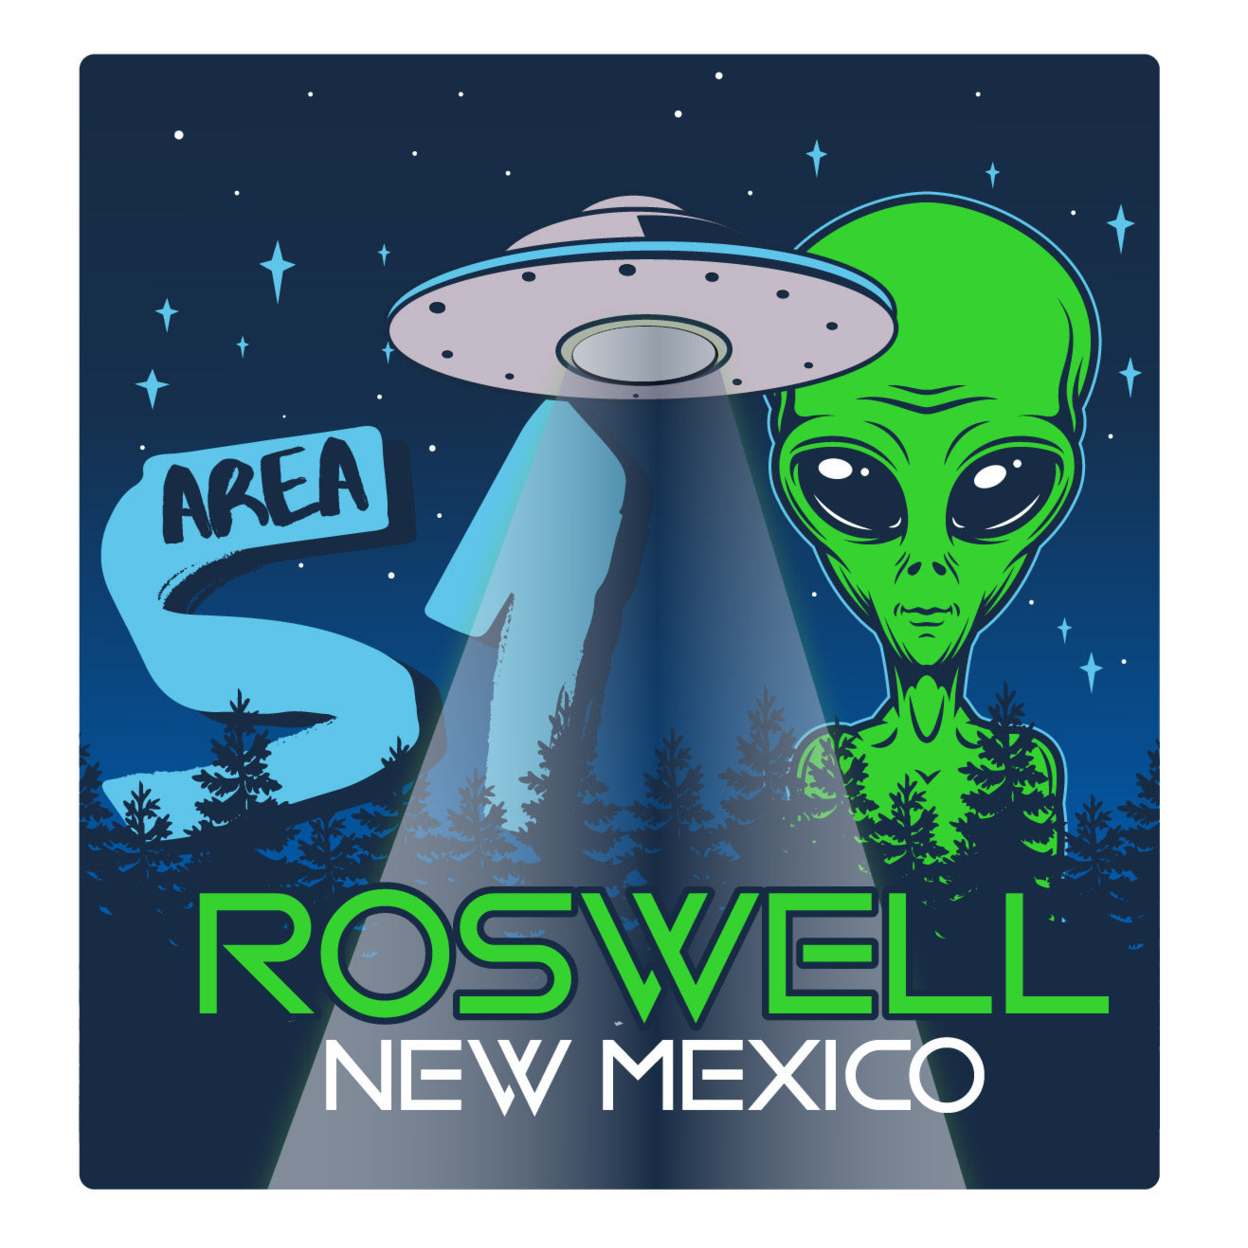 Roswell New Mexico Souvenir UFO Spaceship Area 51 Alien Decal Sticker - 4 Inch